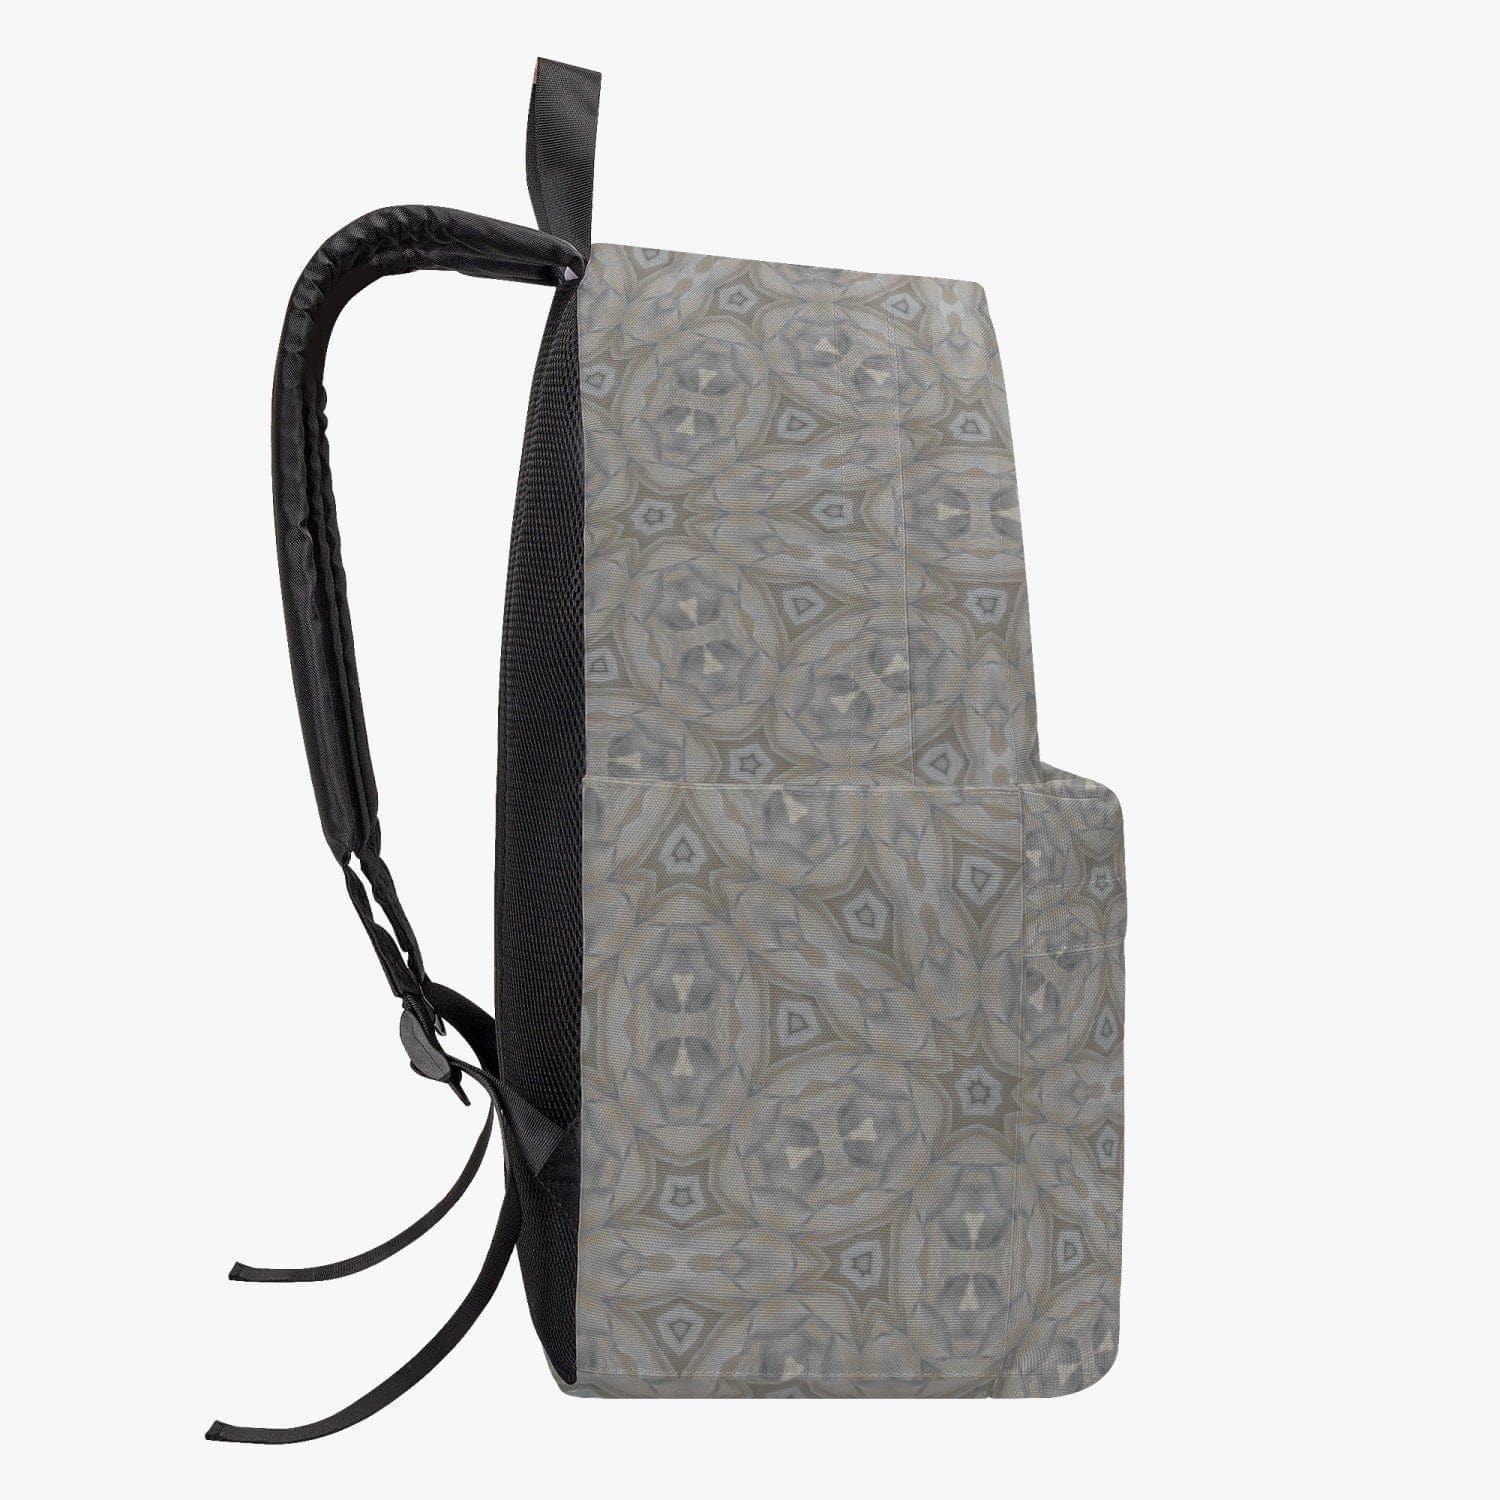 Shades of a white rose,  Cotton Canvas Backpack, designed by Sensus Studio Design